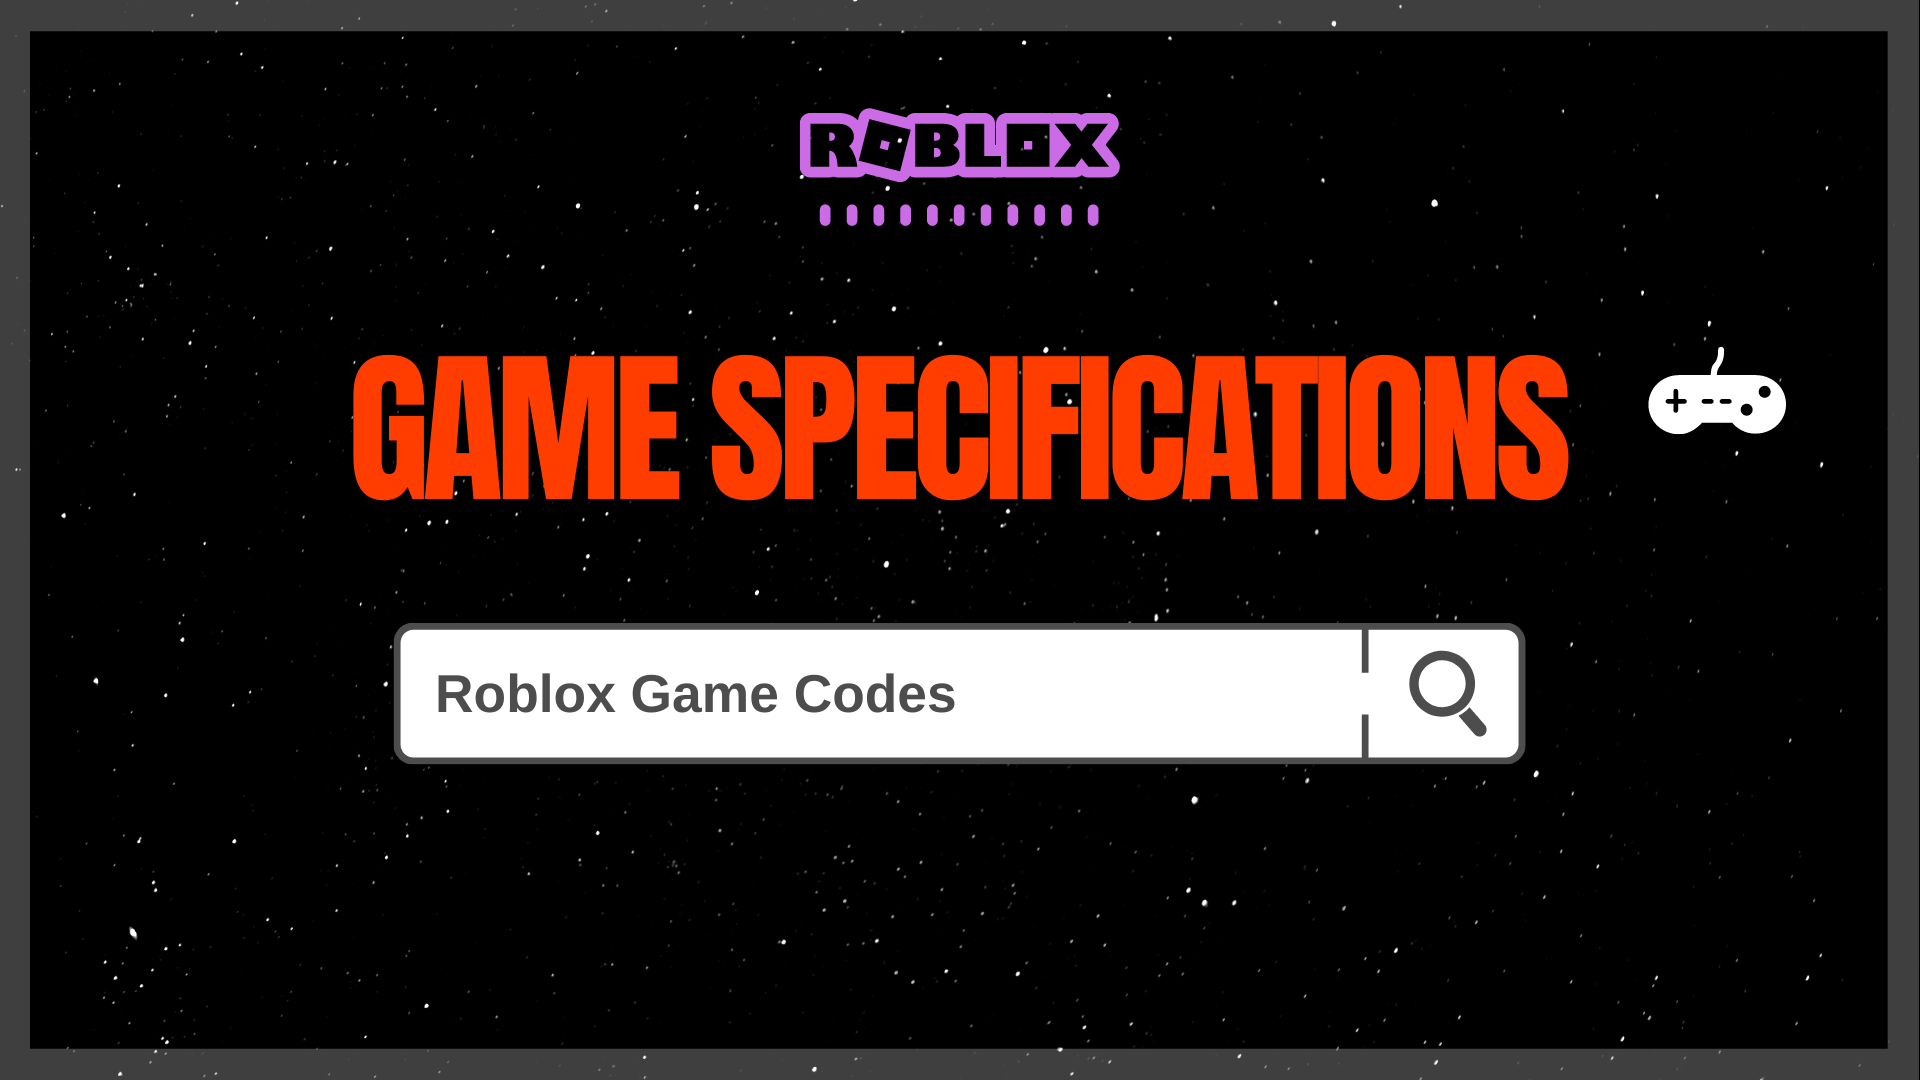 All In One Roblox Game Codes ᐈ Encylopedia Game Specifications - fps paintball roblox code